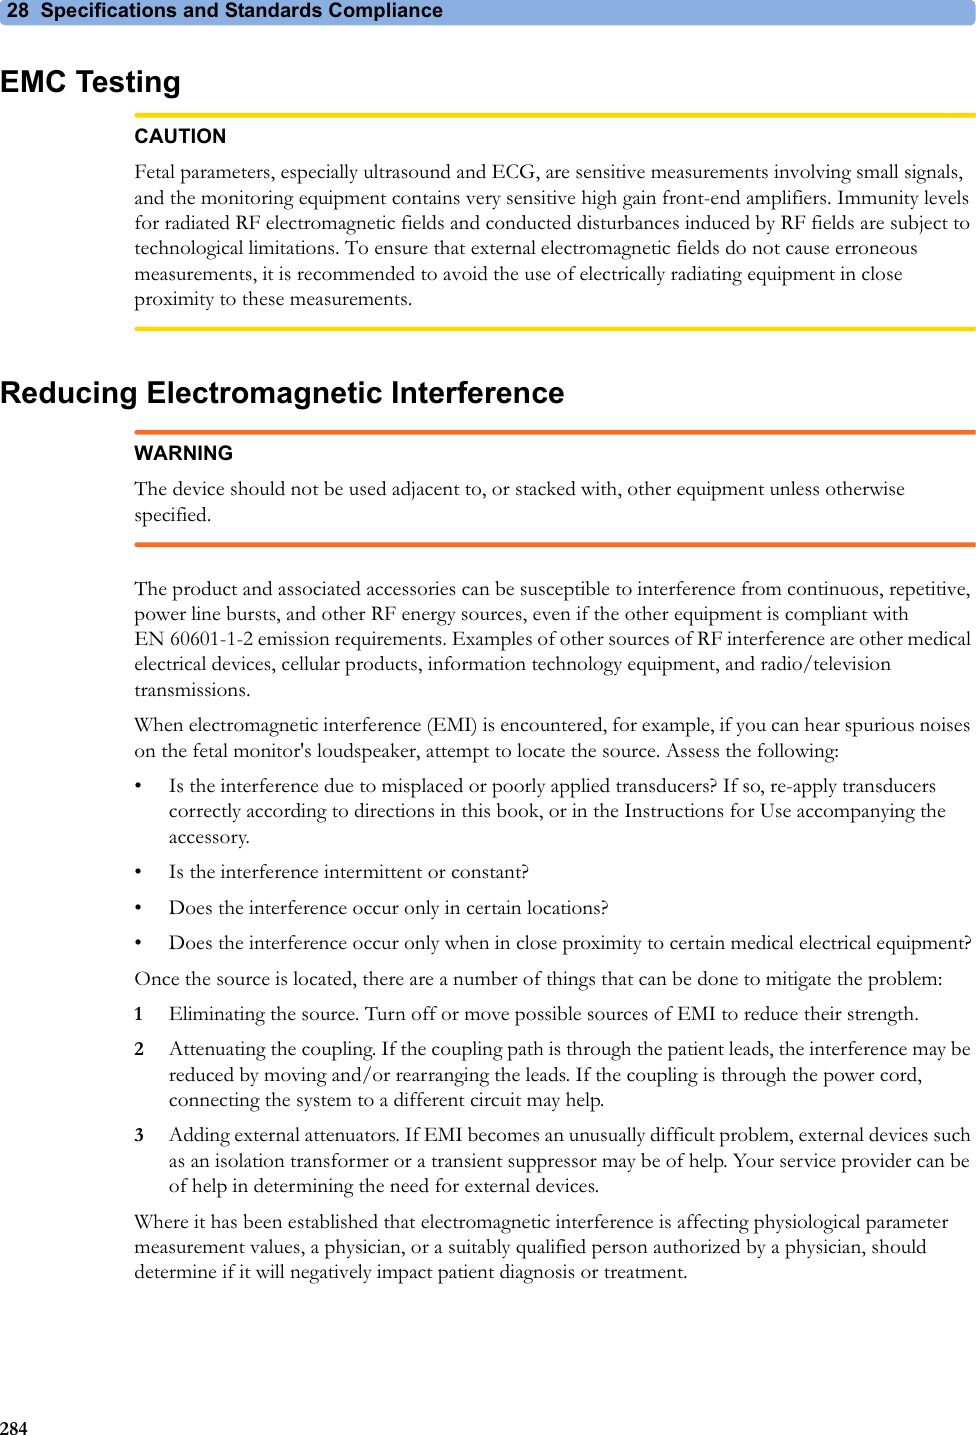 28  Specifications and Standards Compliance284EMC TestingCAUTIONFetal parameters, especially ultrasound and ECG, are sensitive measurements involving small signals, and the monitoring equipment contains very sensitive high gain front-end amplifiers. Immunity levels for radiated RF electromagnetic fields and conducted disturbances induced by RF fields are subject to technological limitations. To ensure that external electromagnetic fields do not cause erroneous measurements, it is recommended to avoid the use of electrically radiating equipment in close proximity to these measurements.Reducing Electromagnetic InterferenceWARNINGThe device should not be used adjacent to, or stacked with, other equipment unless otherwise specified.The product and associated accessories can be susceptible to interference from continuous, repetitive, power line bursts, and other RF energy sources, even if the other equipment is compliant with EN 60601-1-2 emission requirements. Examples of other sources of RF interference are other medical electrical devices, cellular products, information technology equipment, and radio/television transmissions.When electromagnetic interference (EMI) is encountered, for example, if you can hear spurious noises on the fetal monitor&apos;s loudspeaker, attempt to locate the source. Assess the following:• Is the interference due to misplaced or poorly applied transducers? If so, re-apply transducers correctly according to directions in this book, or in the Instructions for Use accompanying the accessory.• Is the interference intermittent or constant?• Does the interference occur only in certain locations?• Does the interference occur only when in close proximity to certain medical electrical equipment?Once the source is located, there are a number of things that can be done to mitigate the problem:1Eliminating the source. Turn off or move possible sources of EMI to reduce their strength.2Attenuating the coupling. If the coupling path is through the patient leads, the interference may be reduced by moving and/or rearranging the leads. If the coupling is through the power cord, connecting the system to a different circuit may help.3Adding external attenuators. If EMI becomes an unusually difficult problem, external devices such as an isolation transformer or a transient suppressor may be of help. Your service provider can be of help in determining the need for external devices.Where it has been established that electromagnetic interference is affecting physiological parameter measurement values, a physician, or a suitably qualified person authorized by a physician, should determine if it will negatively impact patient diagnosis or treatment.